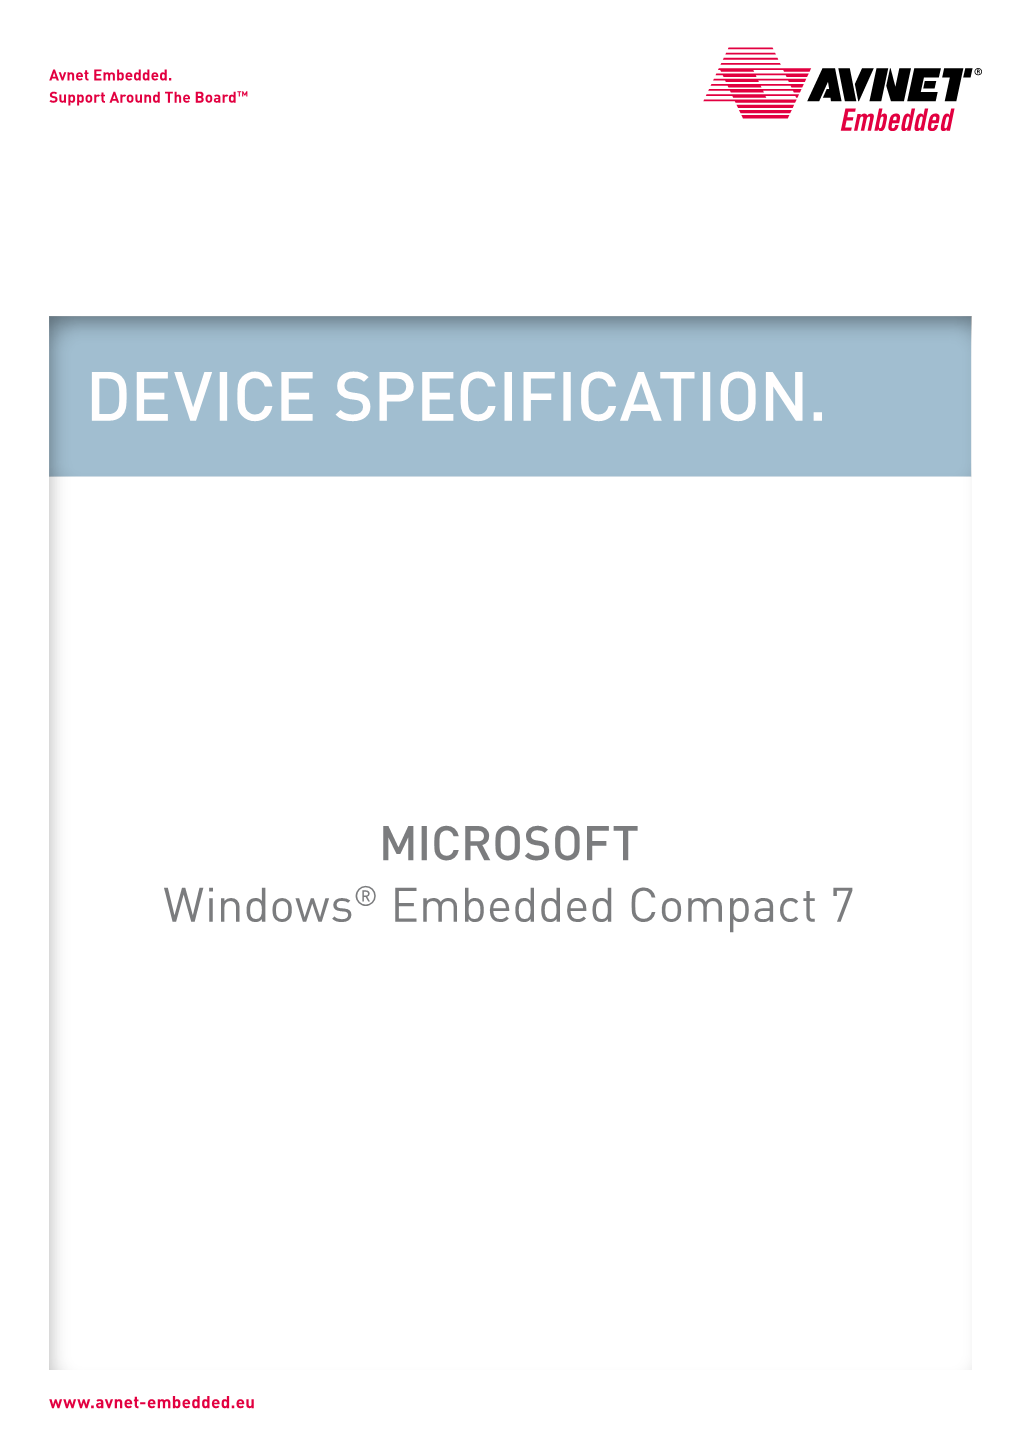 Windows Embedded Compact 7 from Microsoft for Use in Embedded